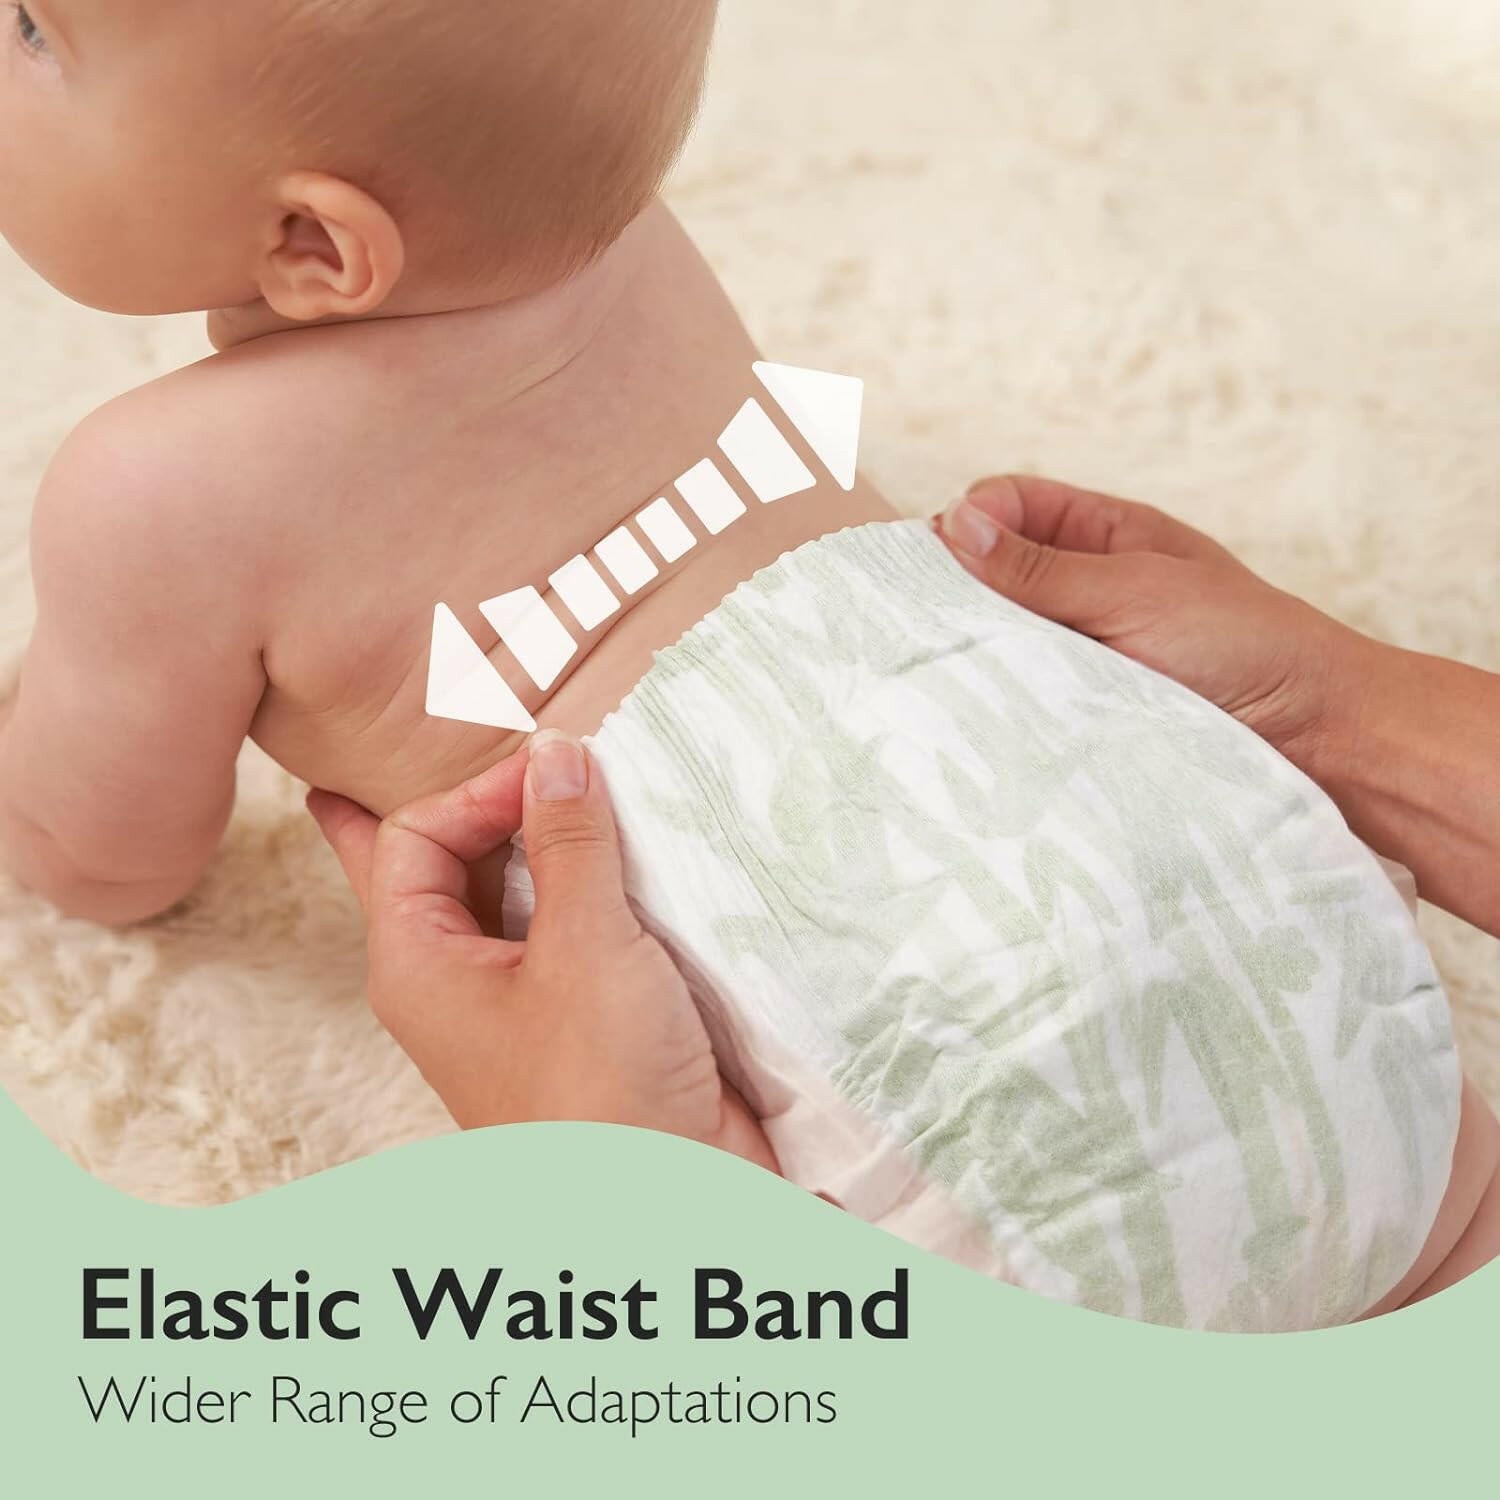 Momcozy Baby Diapers, Natural Bamboo Diapers for Sensitive Skin with Leak-Proof 3D Legcuffs